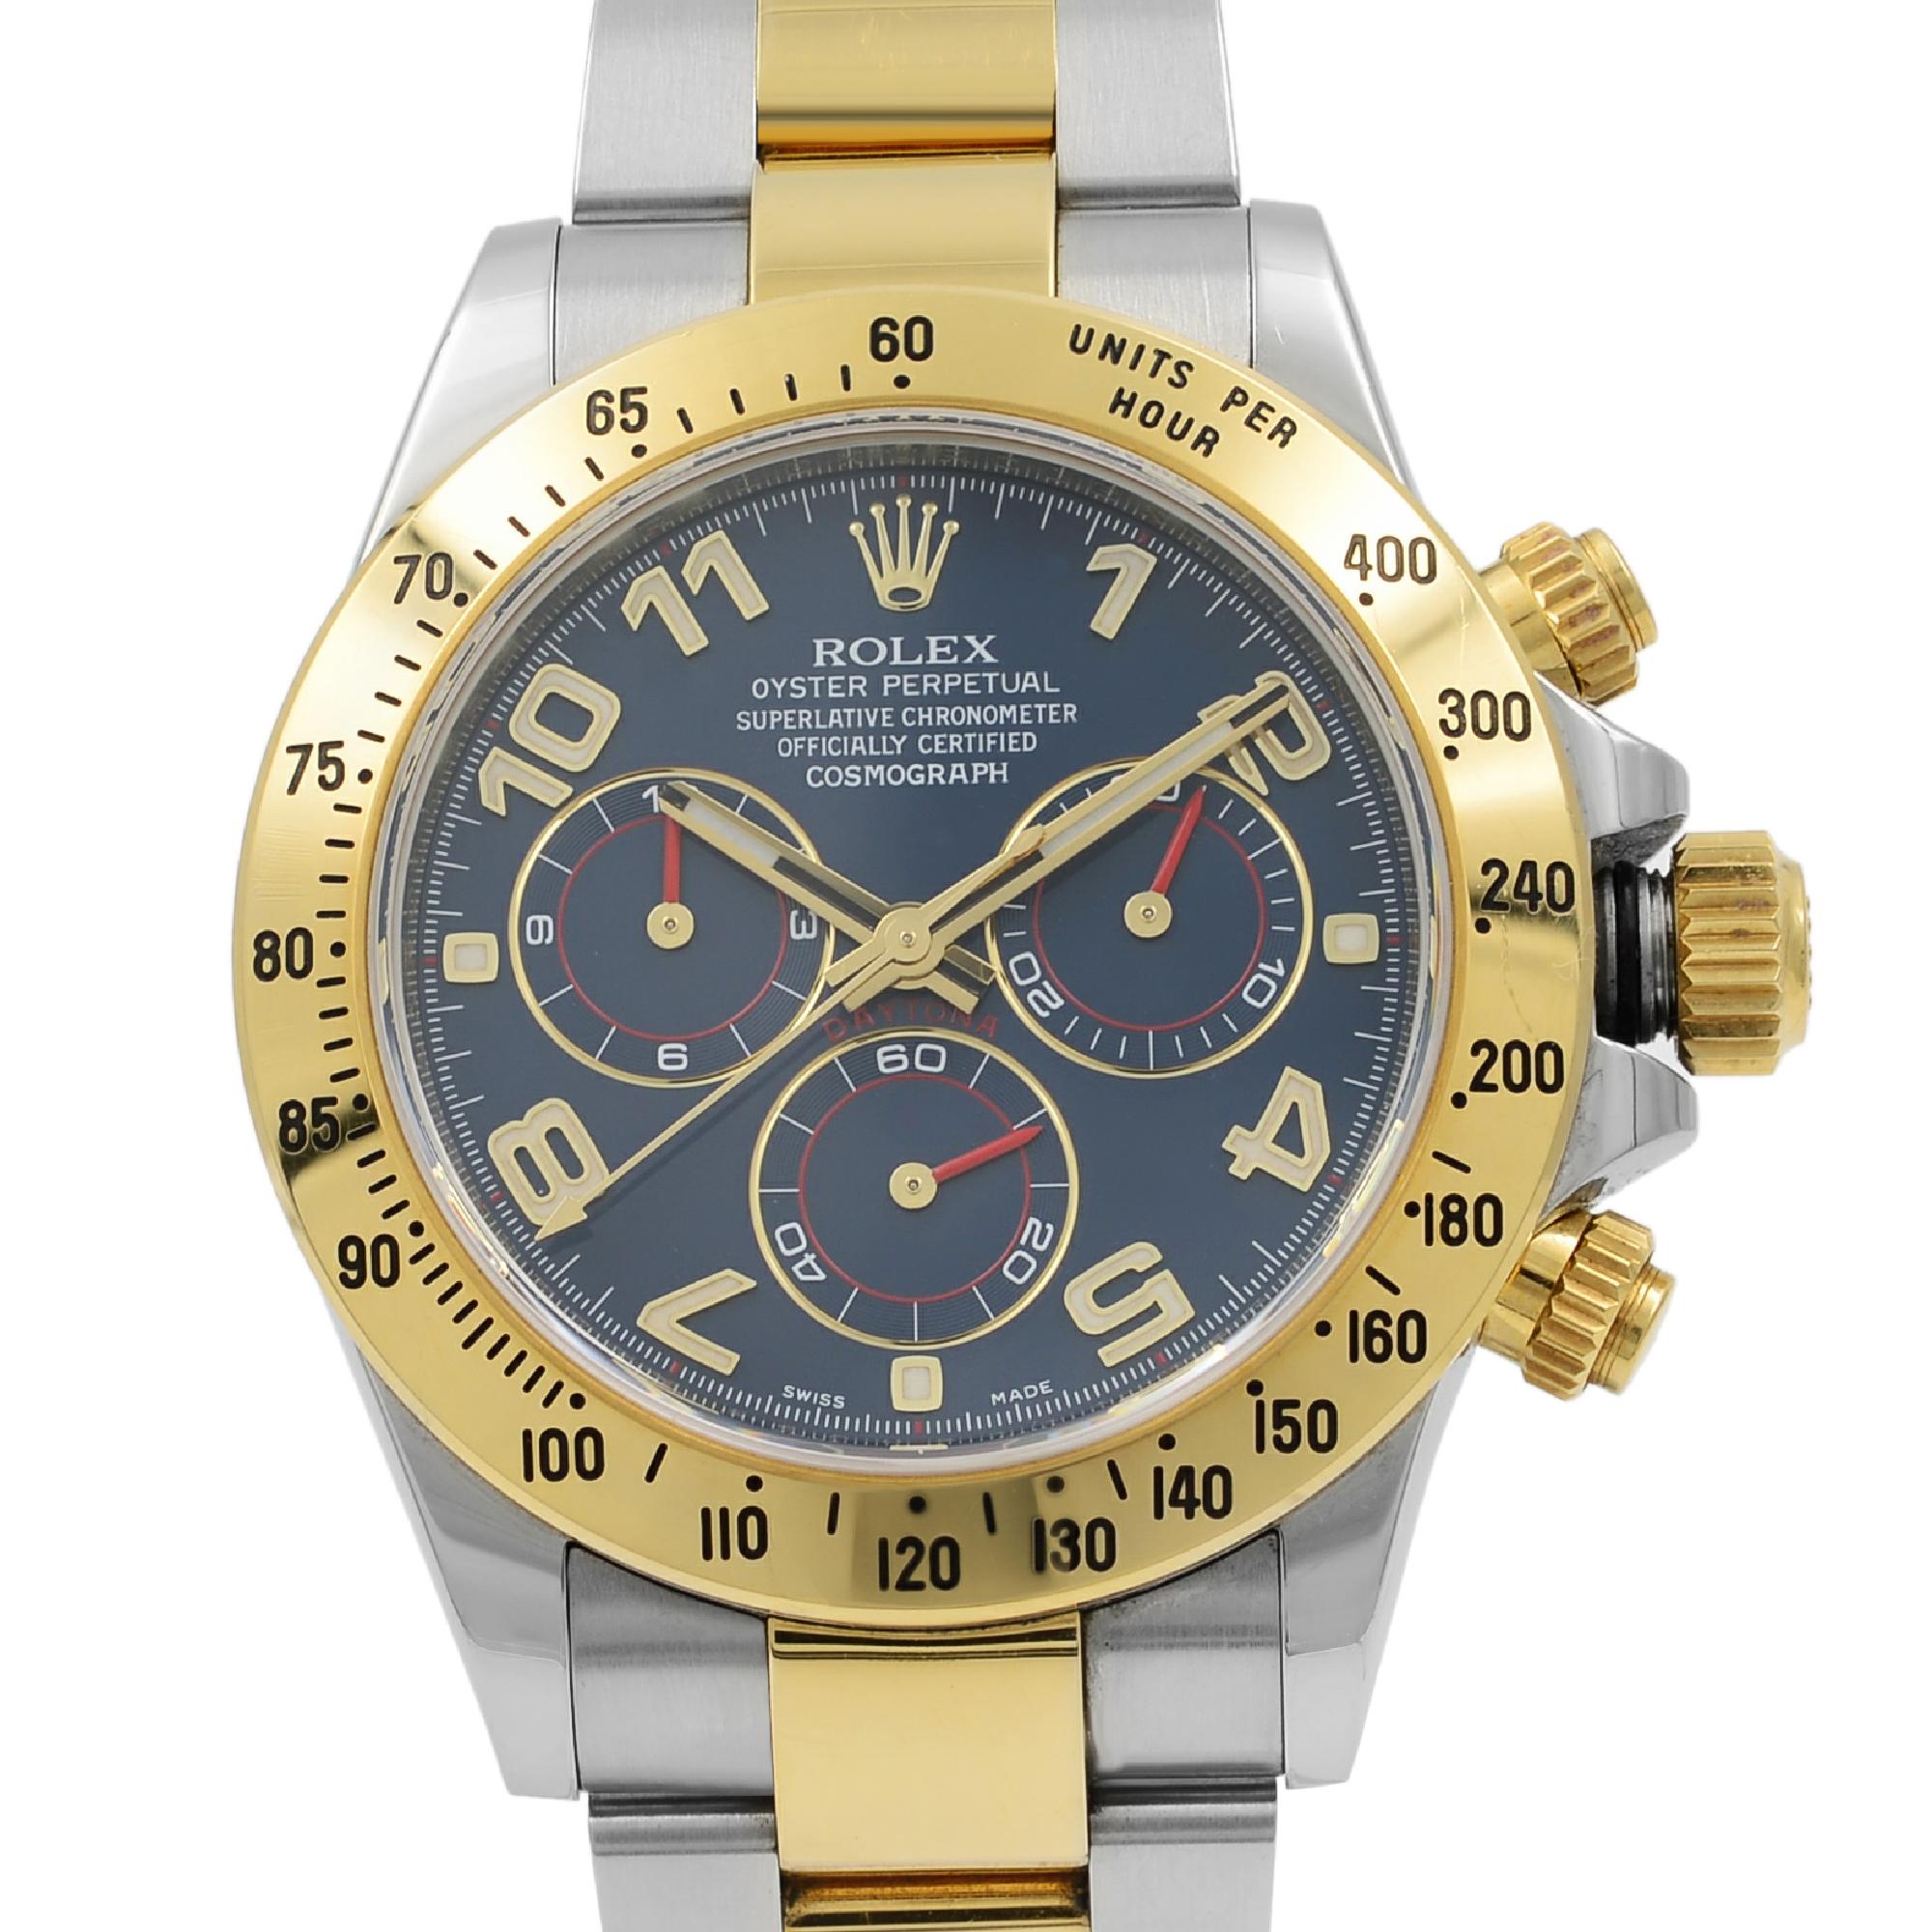 Pre-owned Rolex Cosmograph Daytona 18K Yellow Gold Stainless Steel Blue Racing Dial Automatic Men's Watch 116523.  V-series. The card is dated 2010. This Watch Comes With an Original Box and Papers. Covered by 1-year Chronostore Warranty.